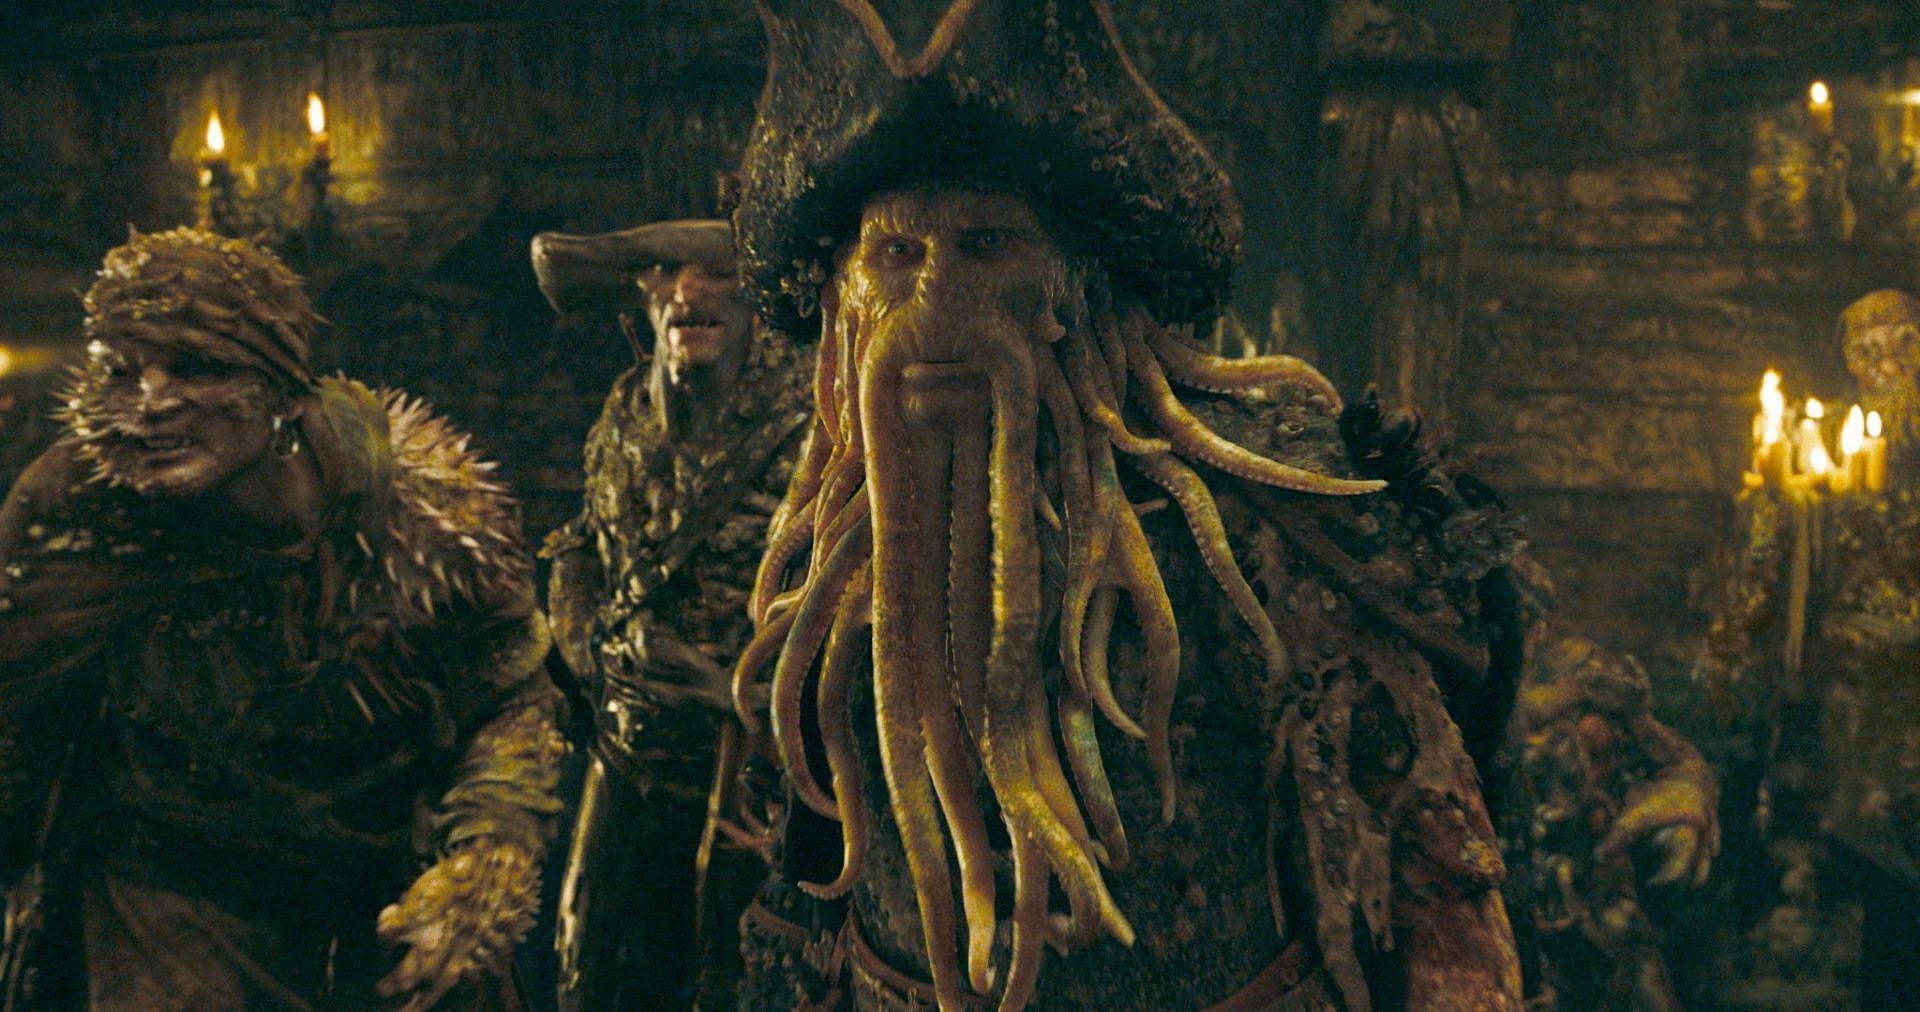 Why a Davy Jones Pirates Spin-off would work